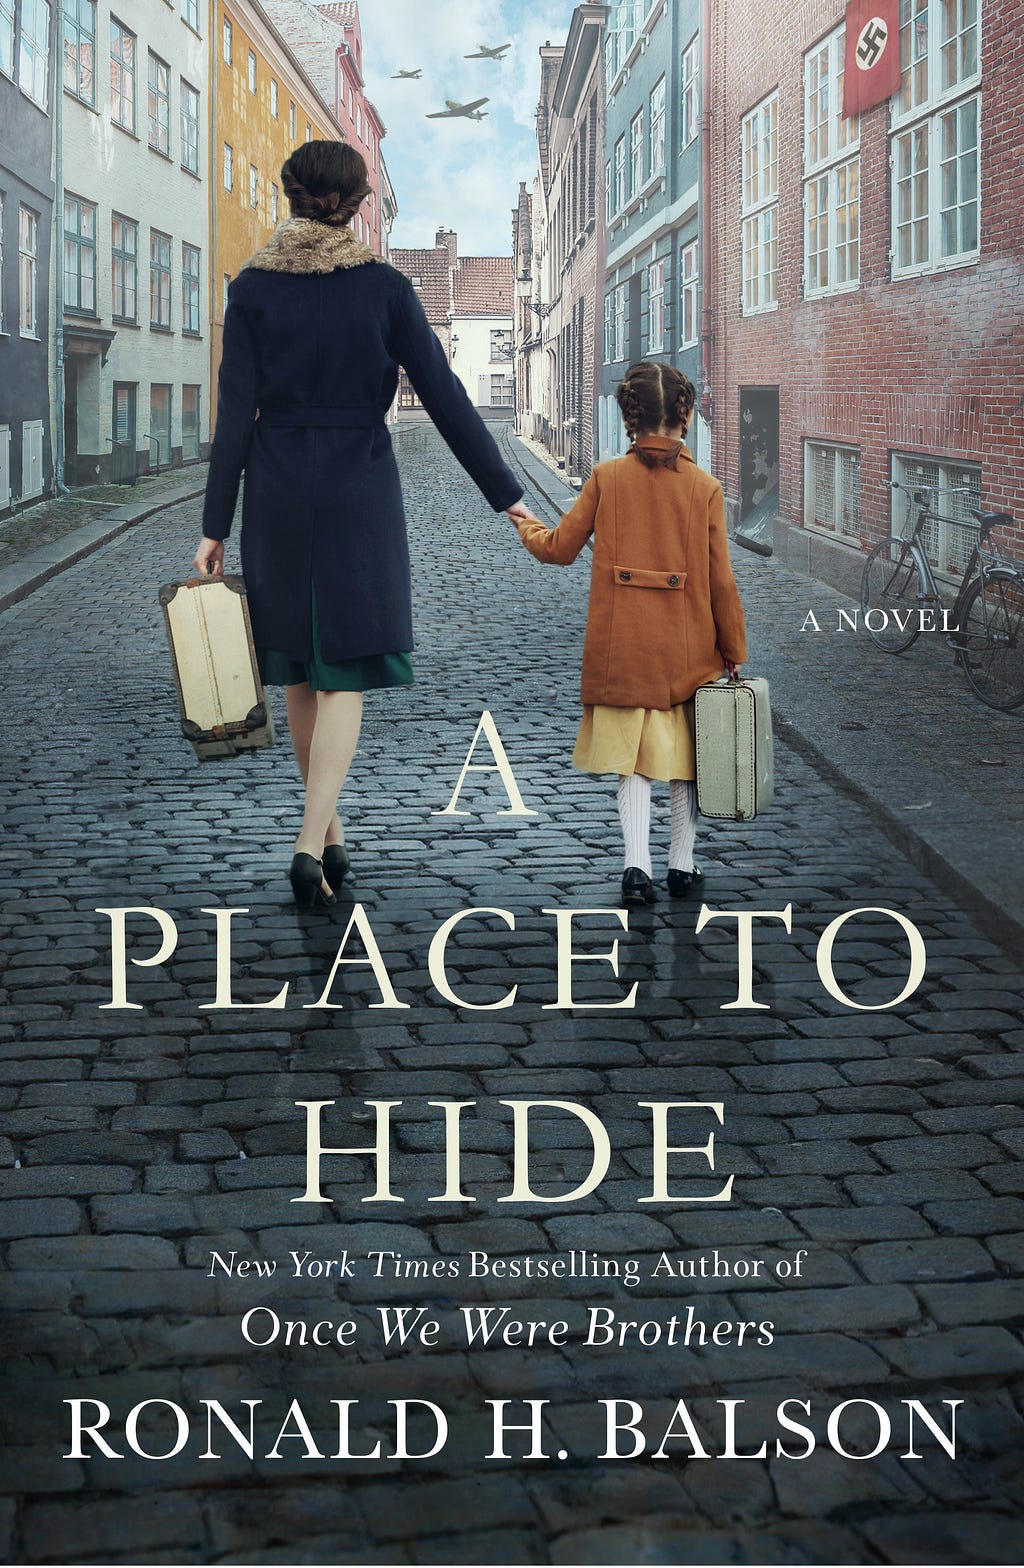 A Place to Hide E book